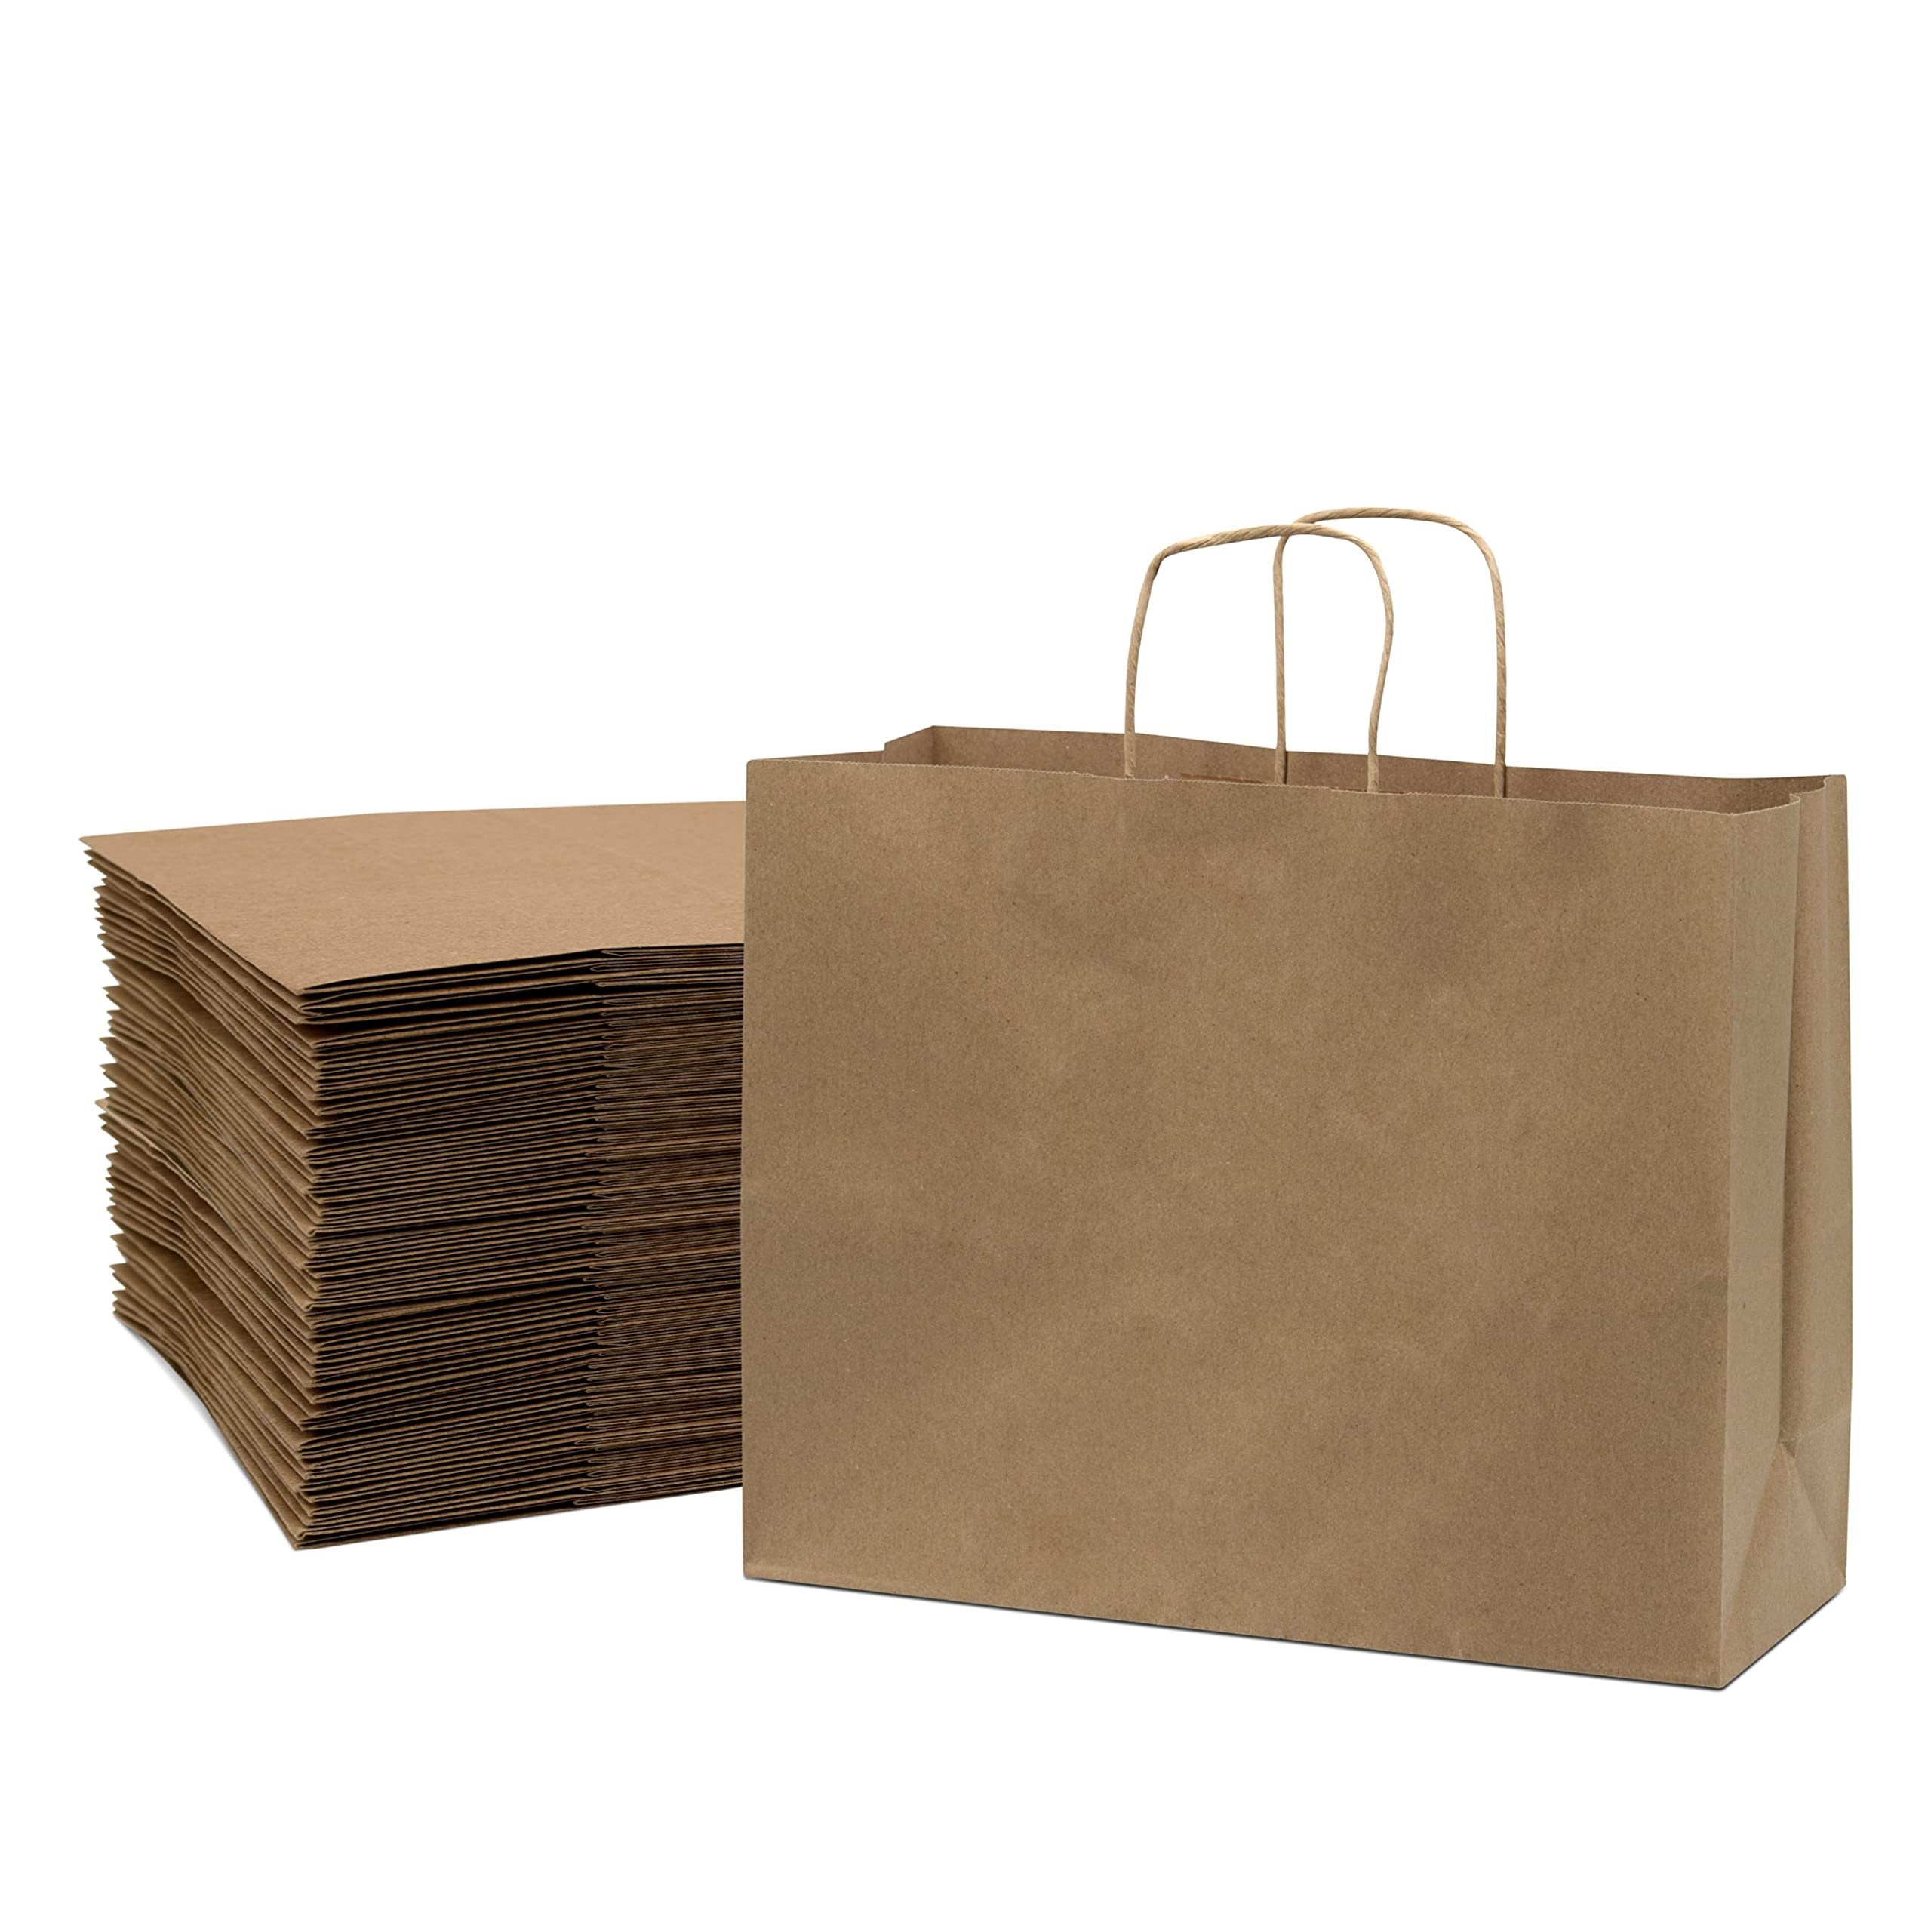 Prime Line Packaging - 16x6x12 Inch 50 Pack Brown Paper Bags with Handles, Large Gift Bags, Kraft Shopping Bags in Bulk for Boutiques, Small Business, Retail Stores, Gifts & Merchandise